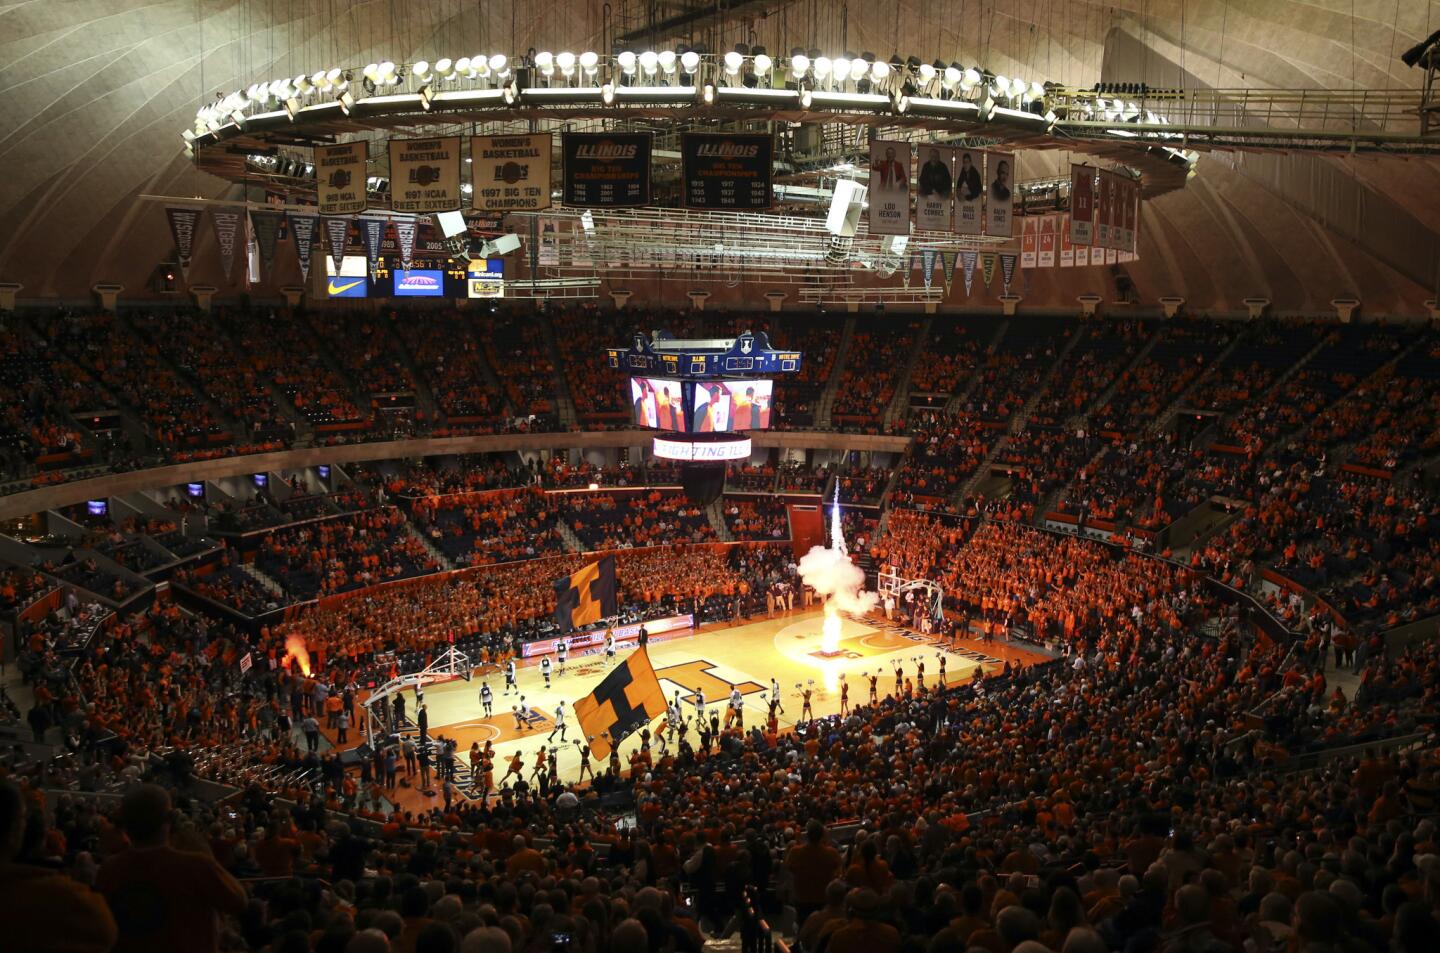 With luxury seating, an intense Orange Krush hovering over the court and even a sideline DJ, the renovated State Farm Center (at a price tag of nearly $170 million) is a Big Ten gem. The outside is still a hideous spaceship shape but once fans walk in the arena they're hit with a cool, friendly arena.